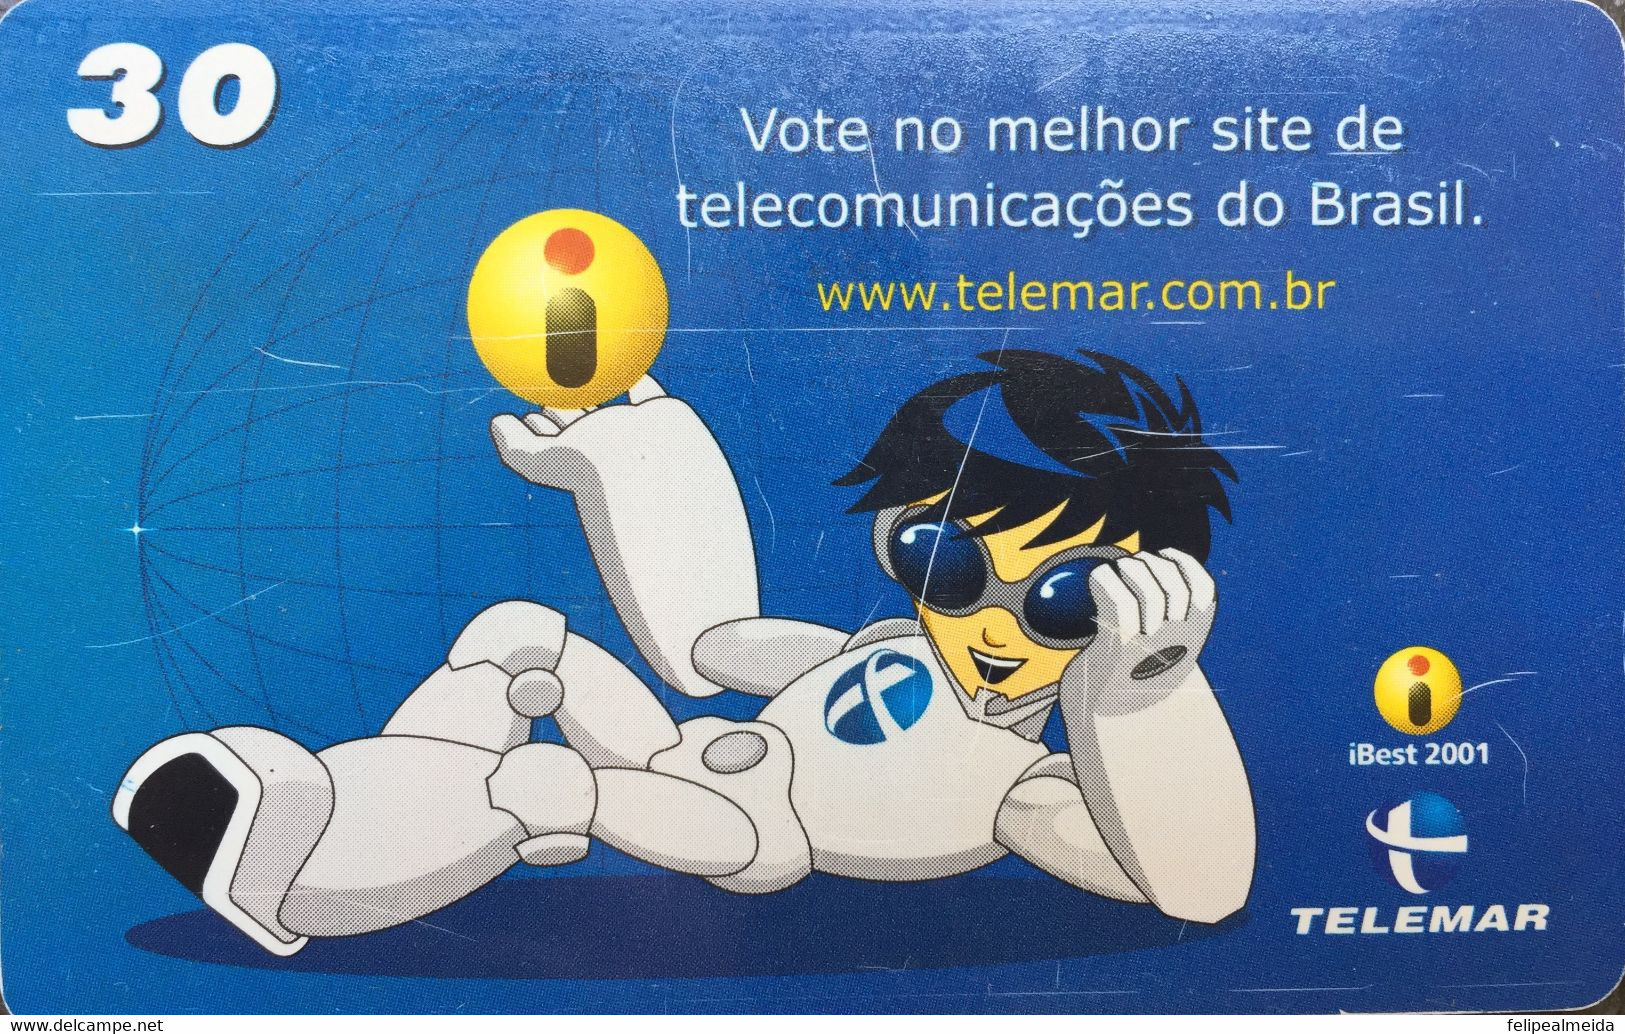 Phone Card Made By Telemar In 2001 - Telemar In The Ibest 2001 Award - The Biggest Award In The Brazilian Internet - Telekom-Betreiber